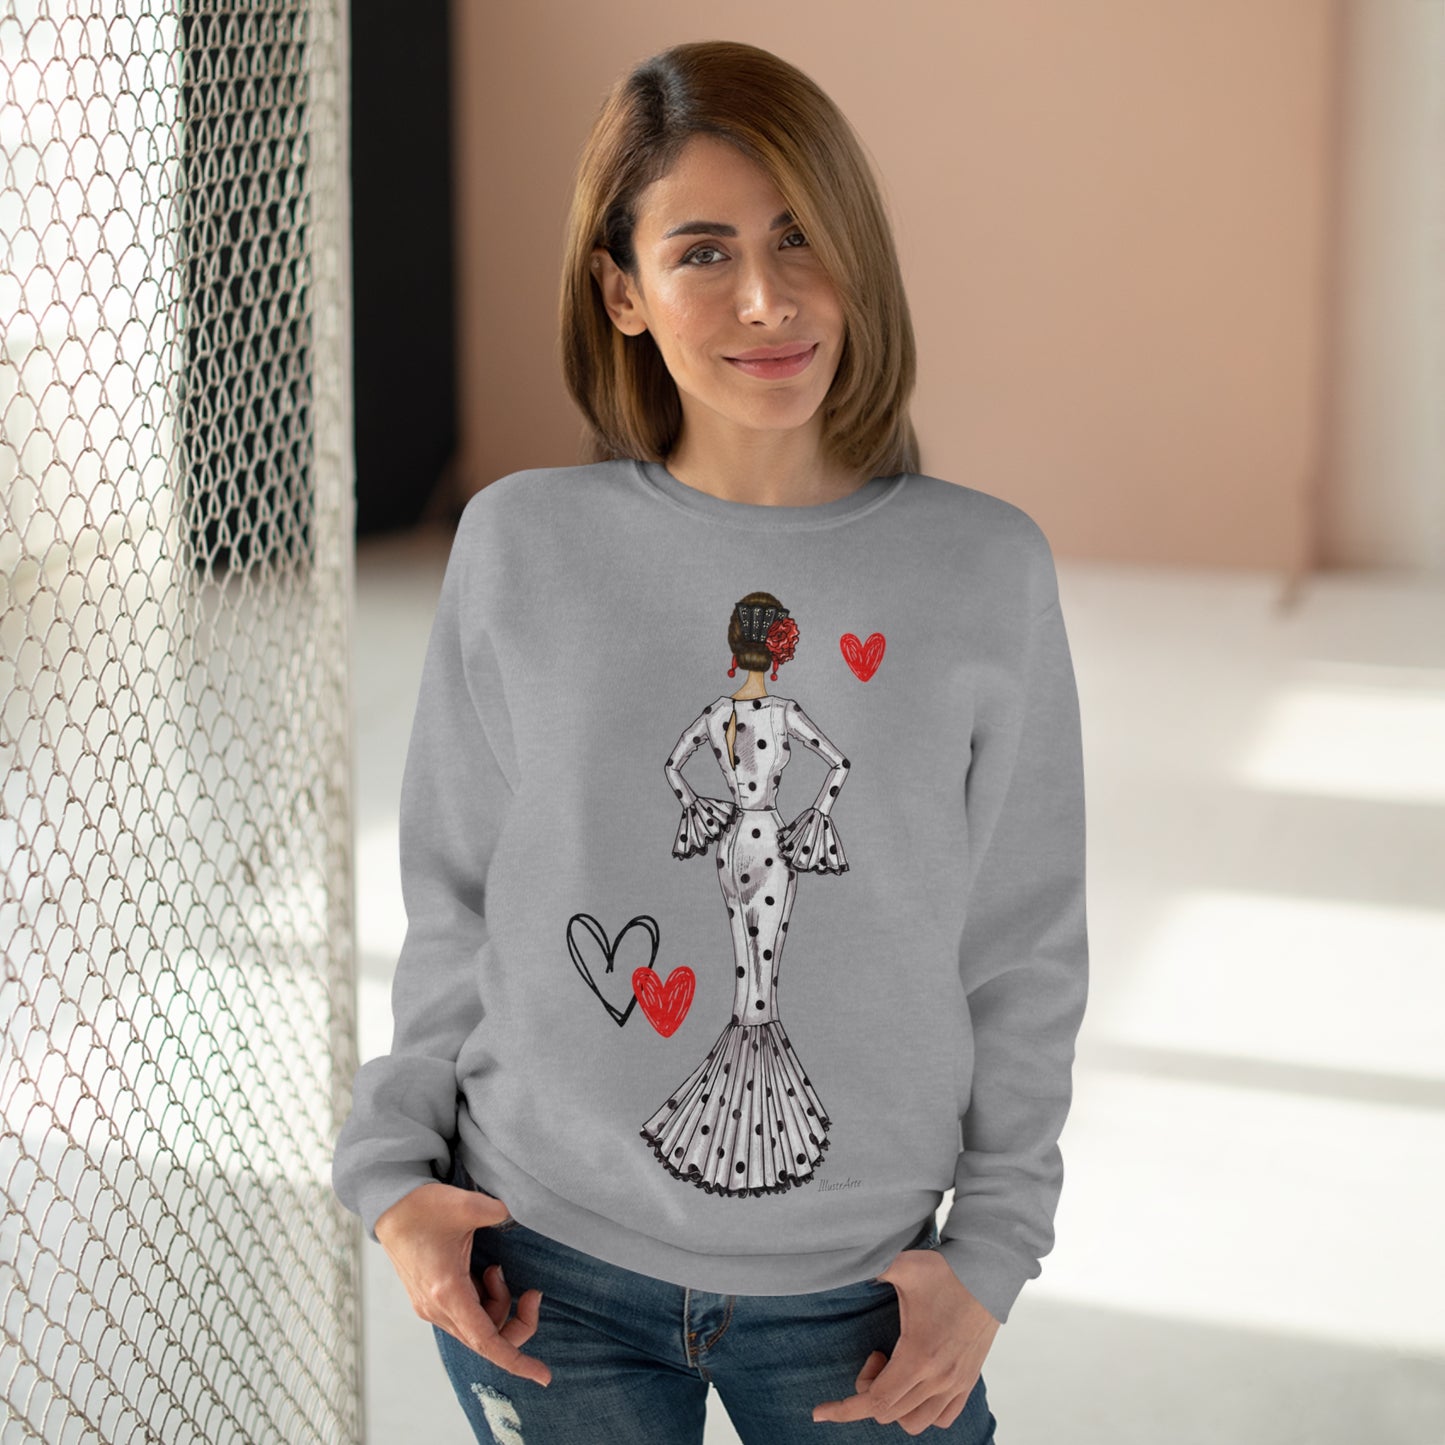 a woman wearing a sweater with a picture of a woman on it